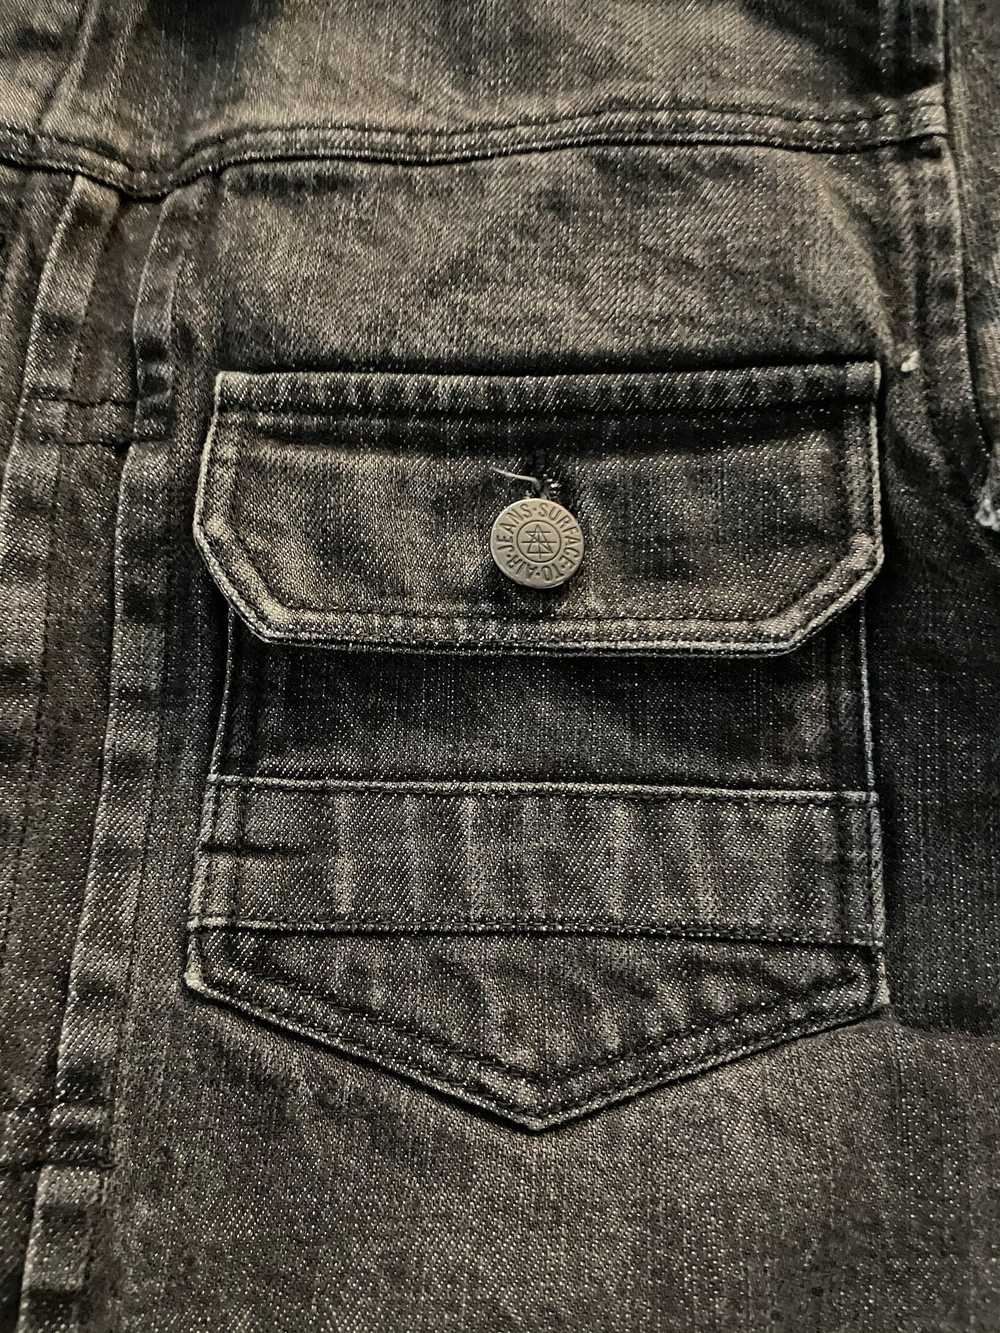 Surface To Air Surface to air Denim Jacket - image 3